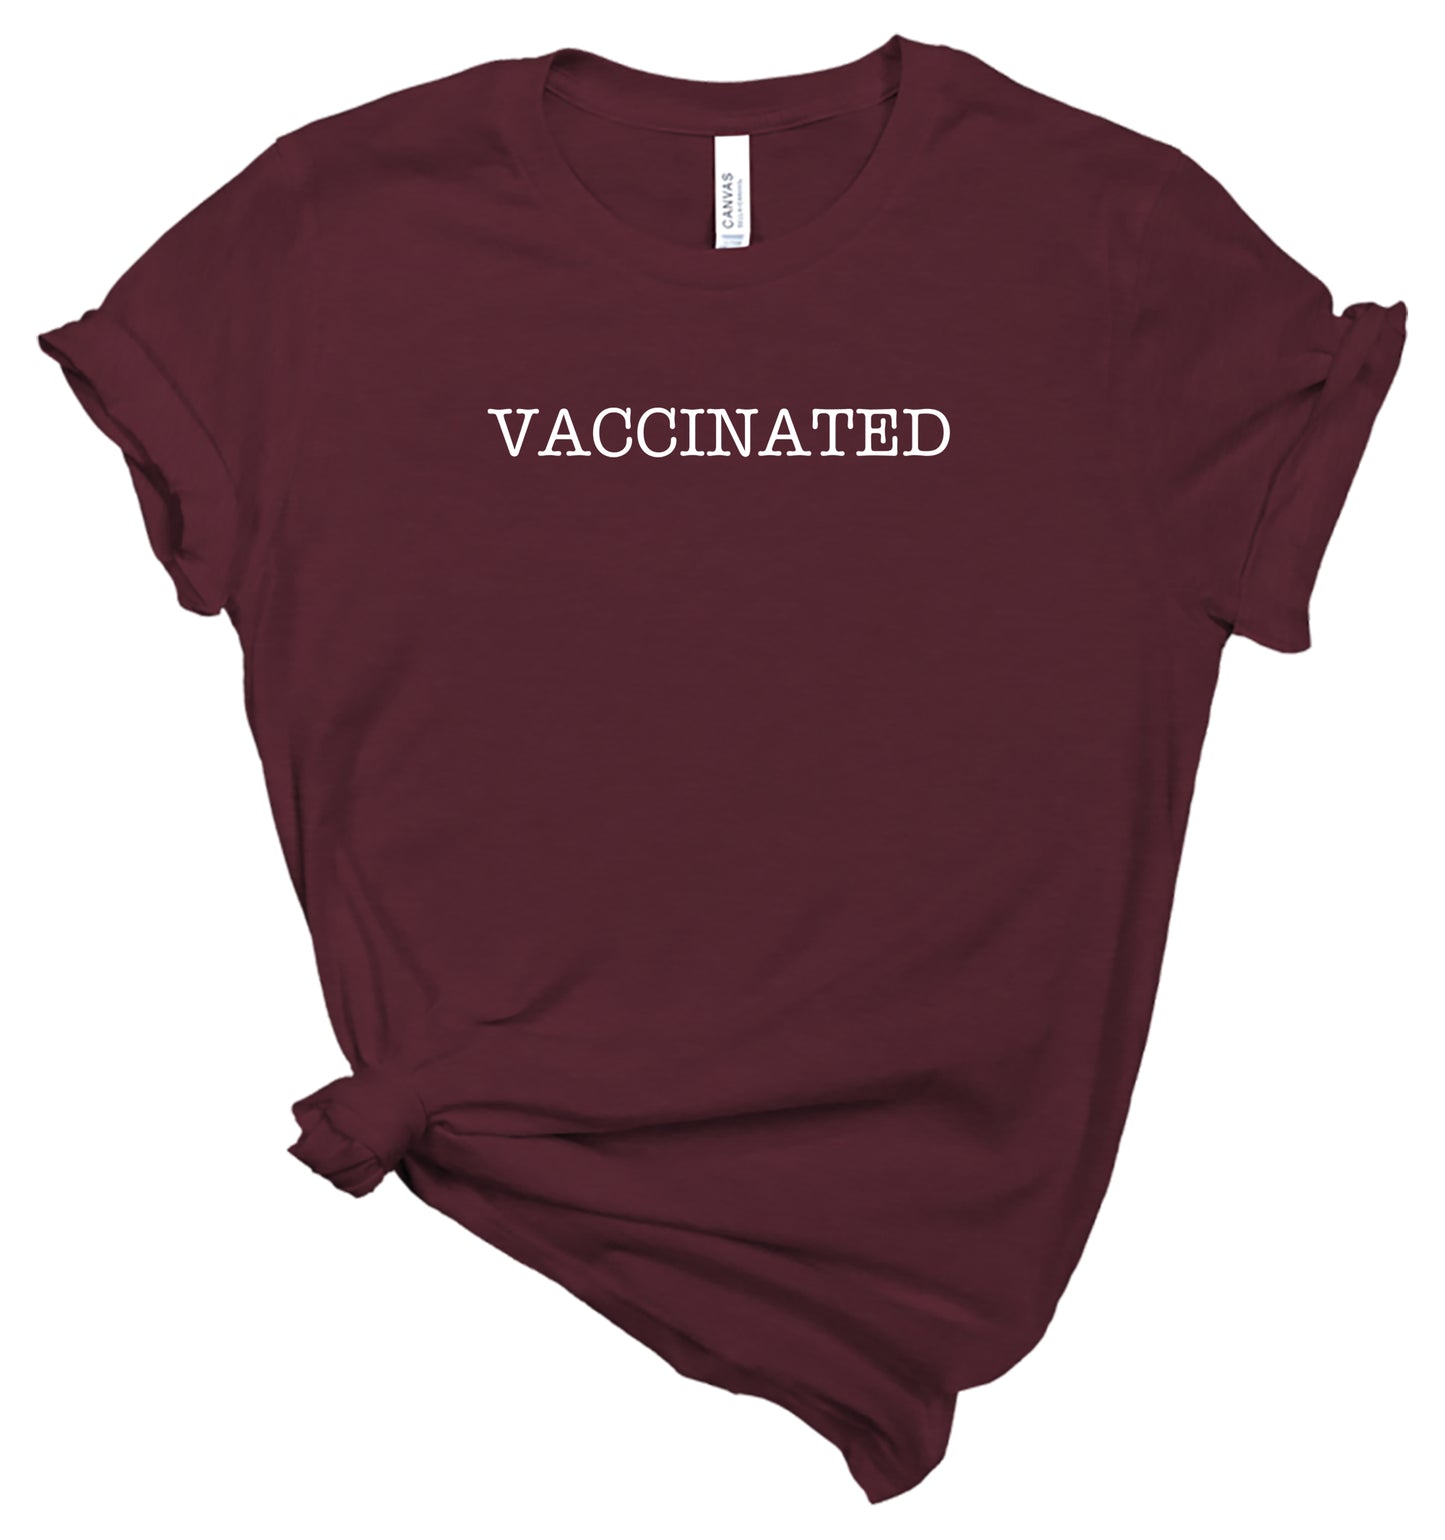 Vaccinated - T-Shirt